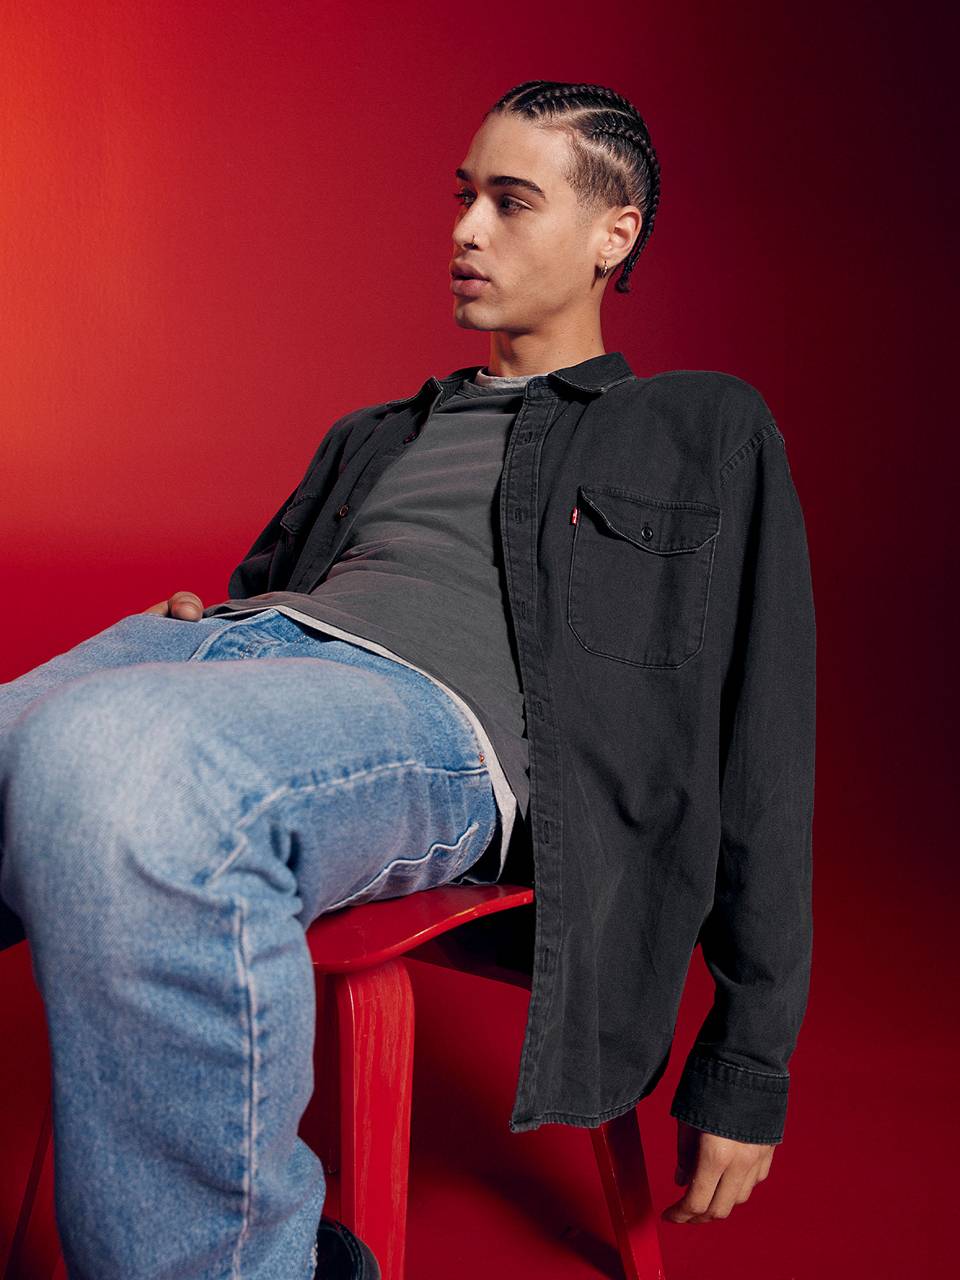 Image of model in Levi's Jackson Worker Shirt.